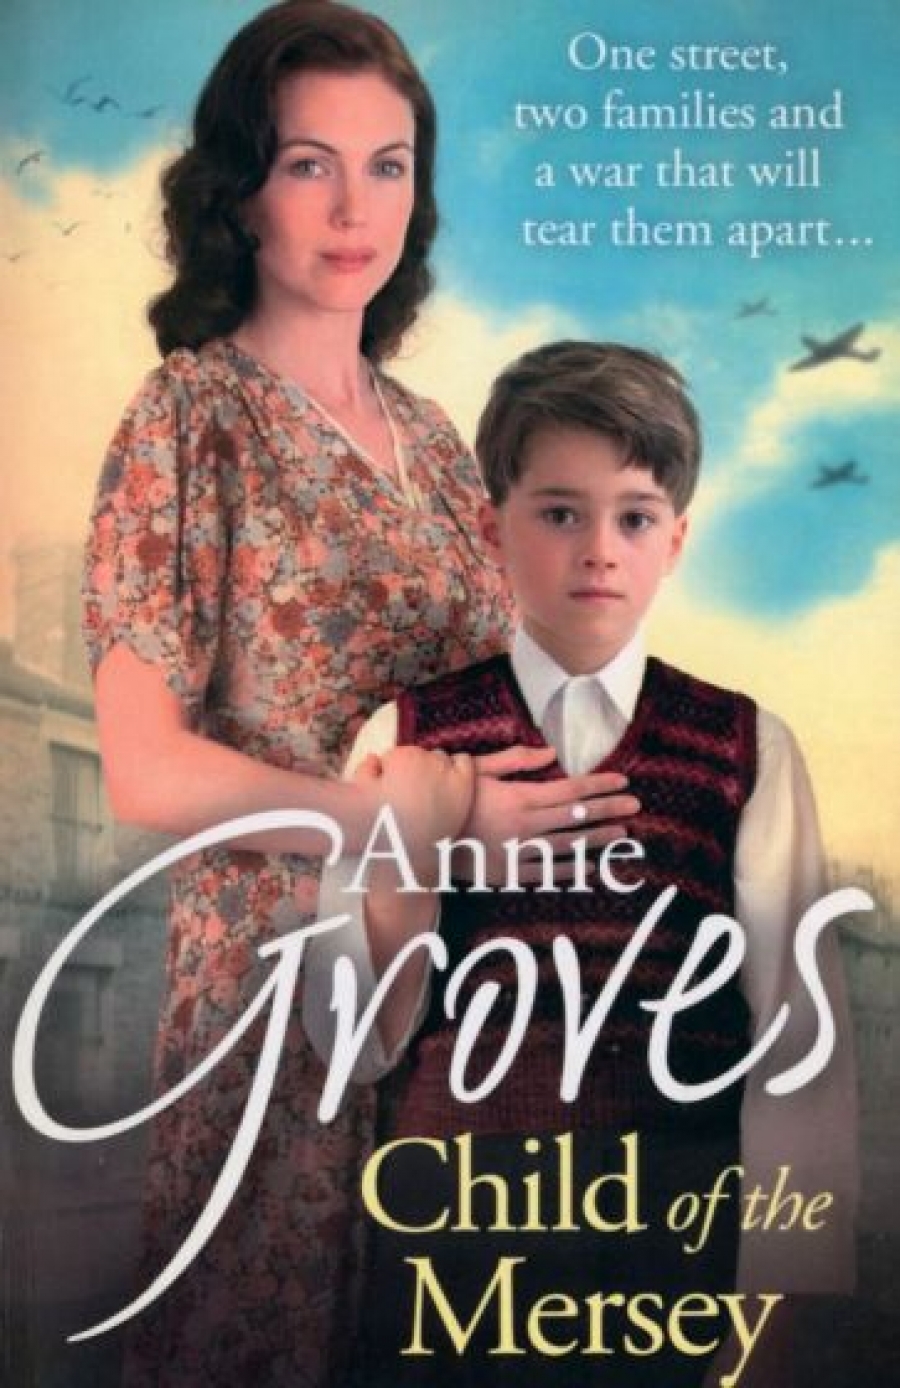 Groves Annie Child of the Mersey 